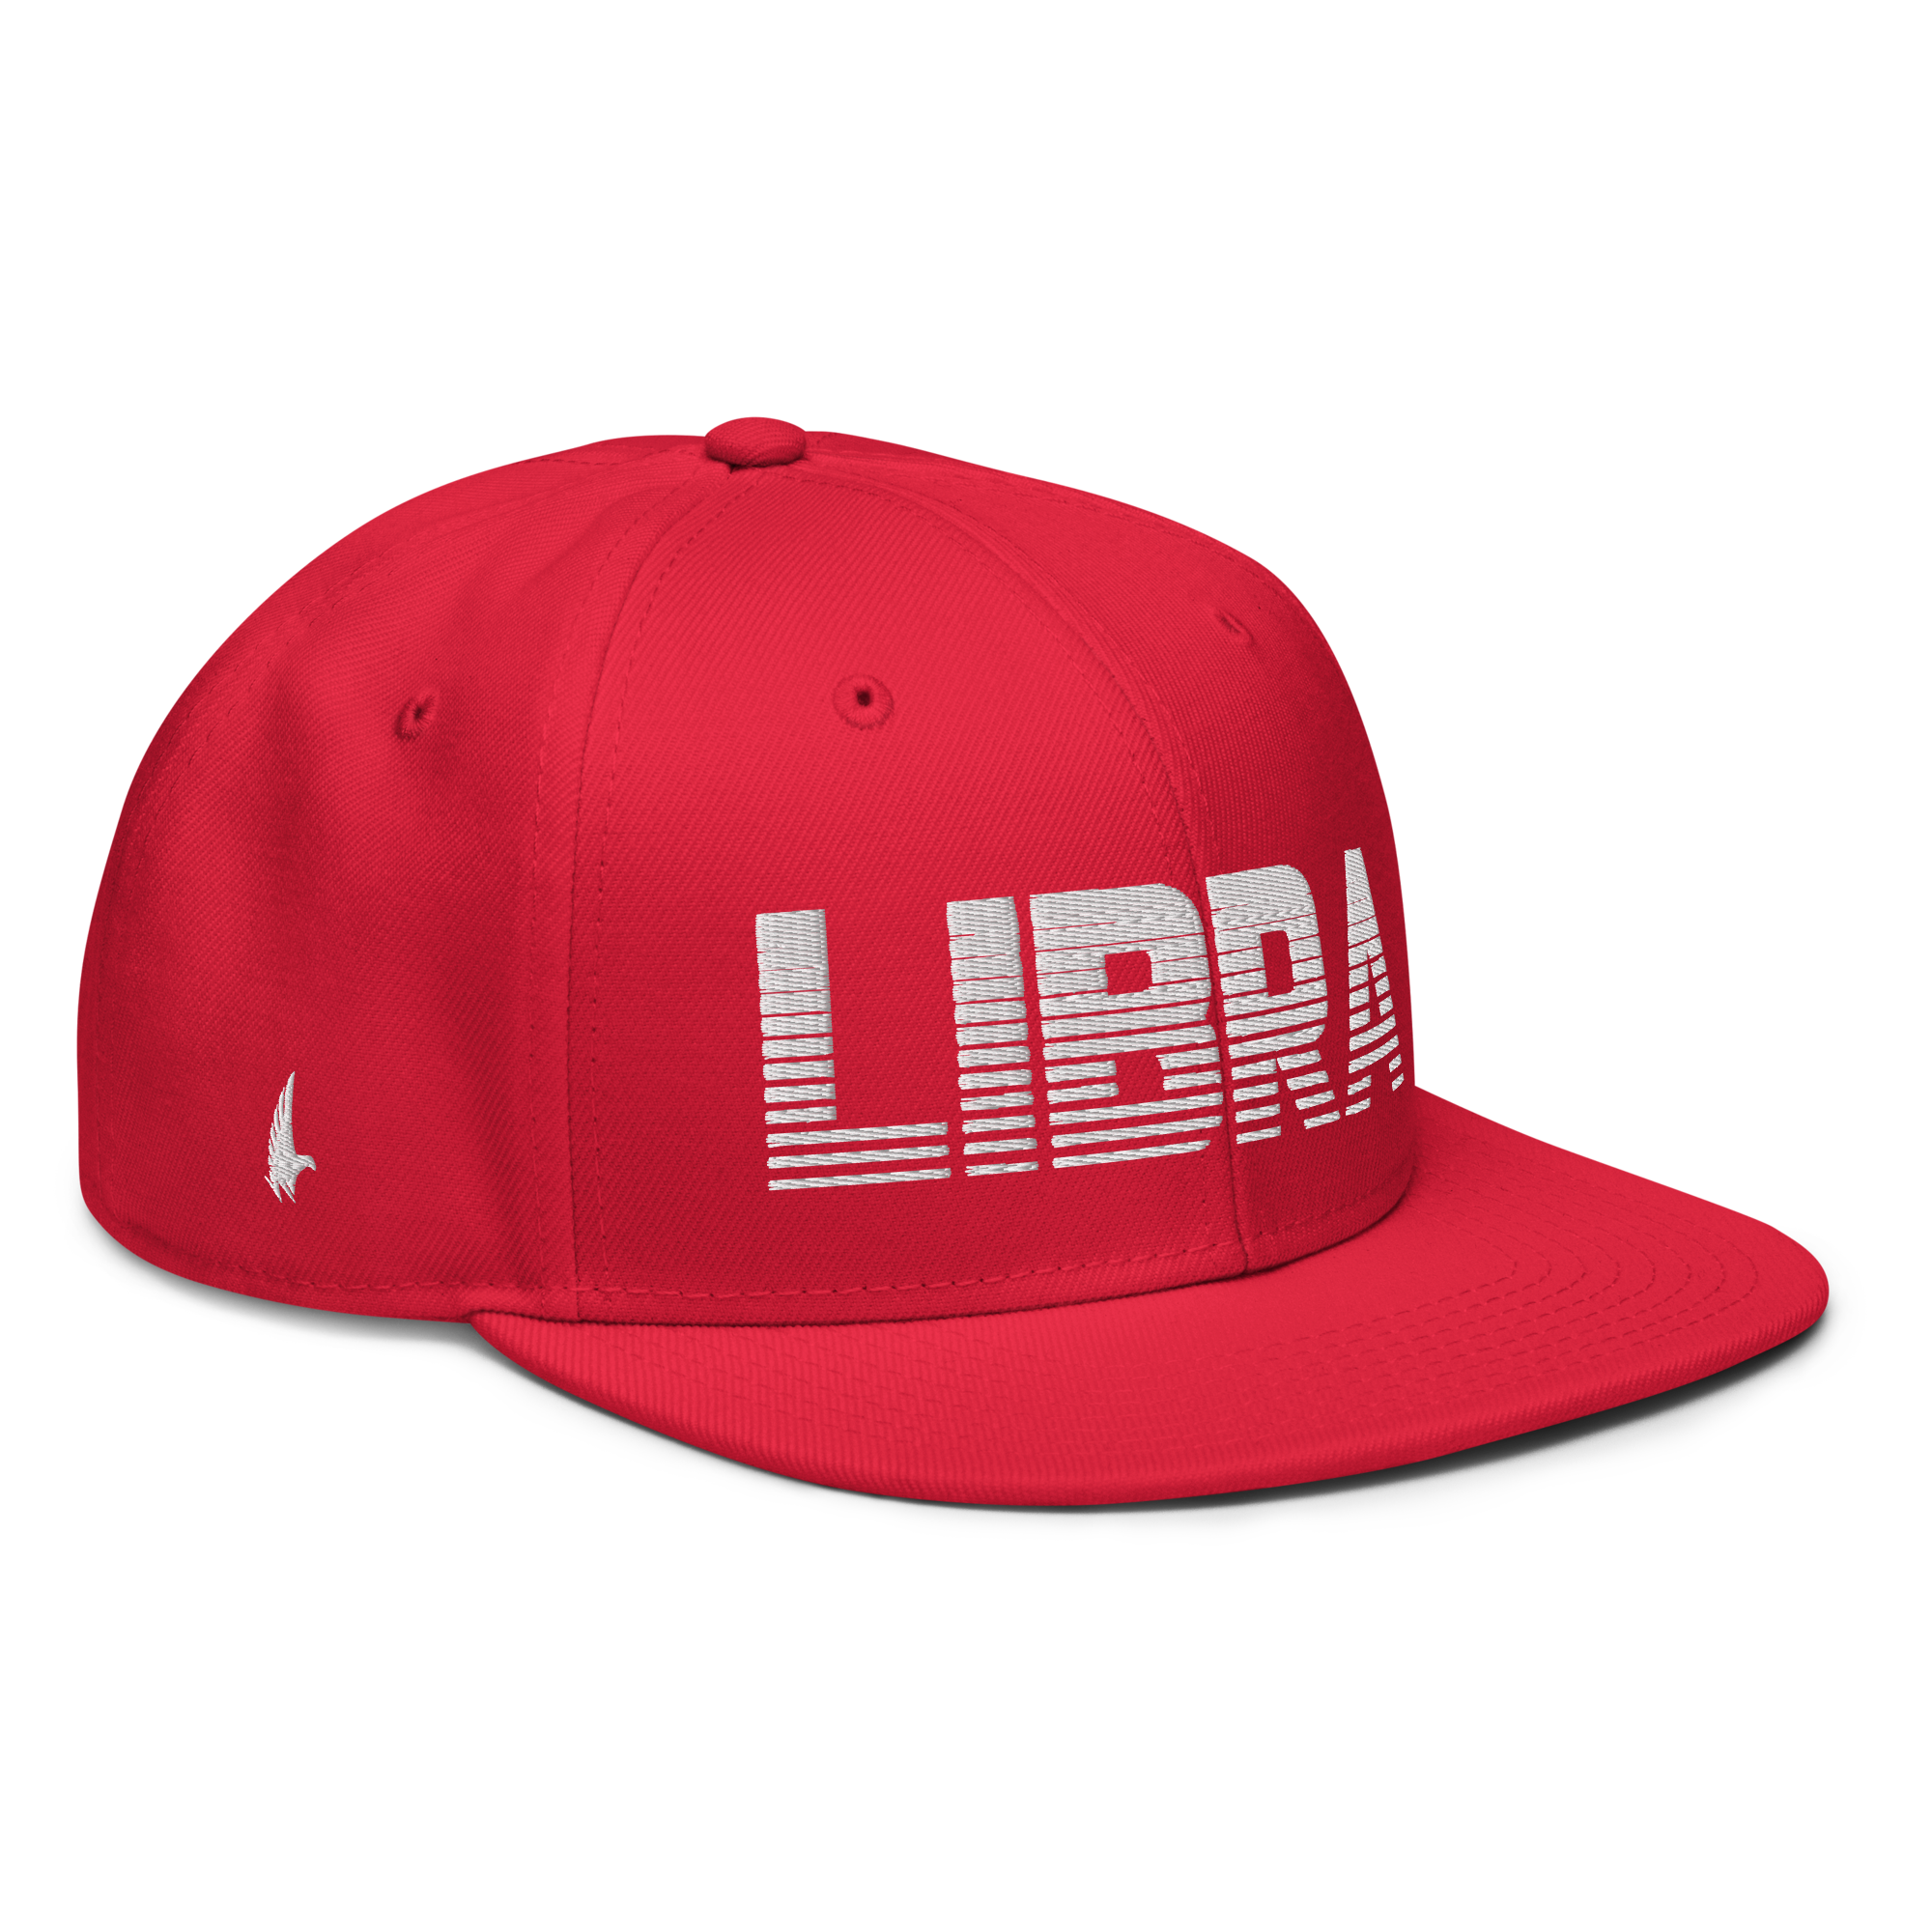 Libra Snapback Hat - Red / White - Loyalty Vibes